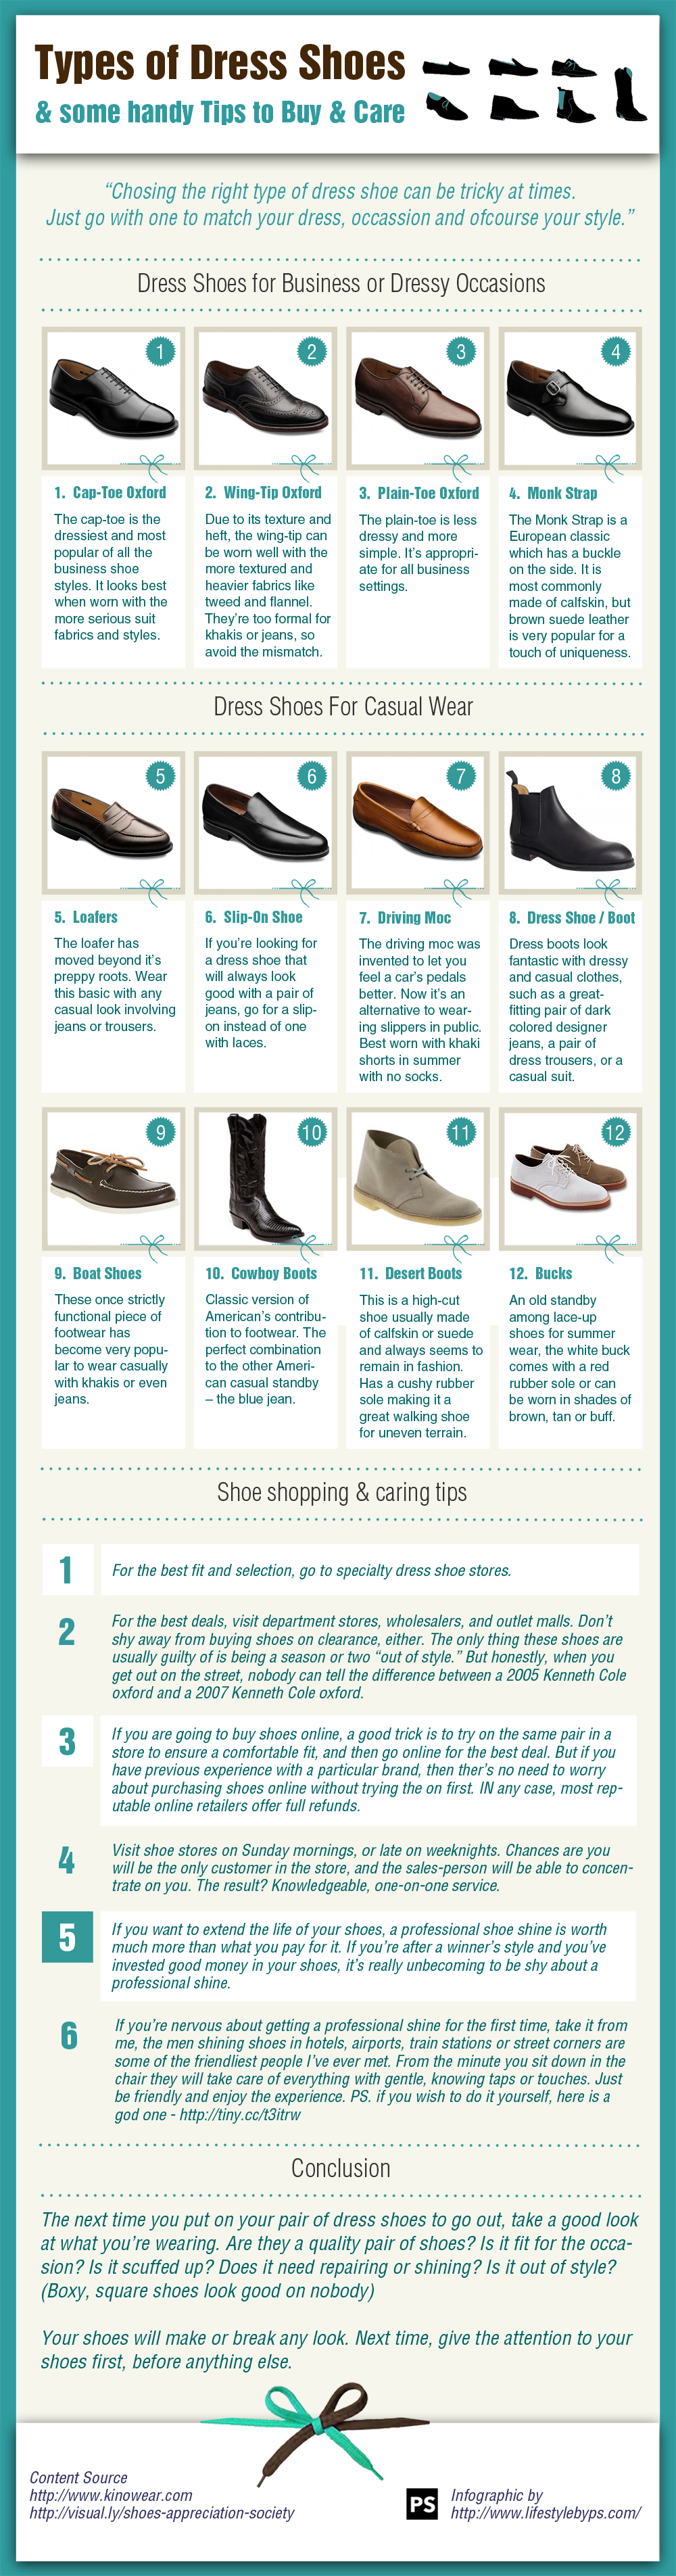 Types of Shoes Infographic